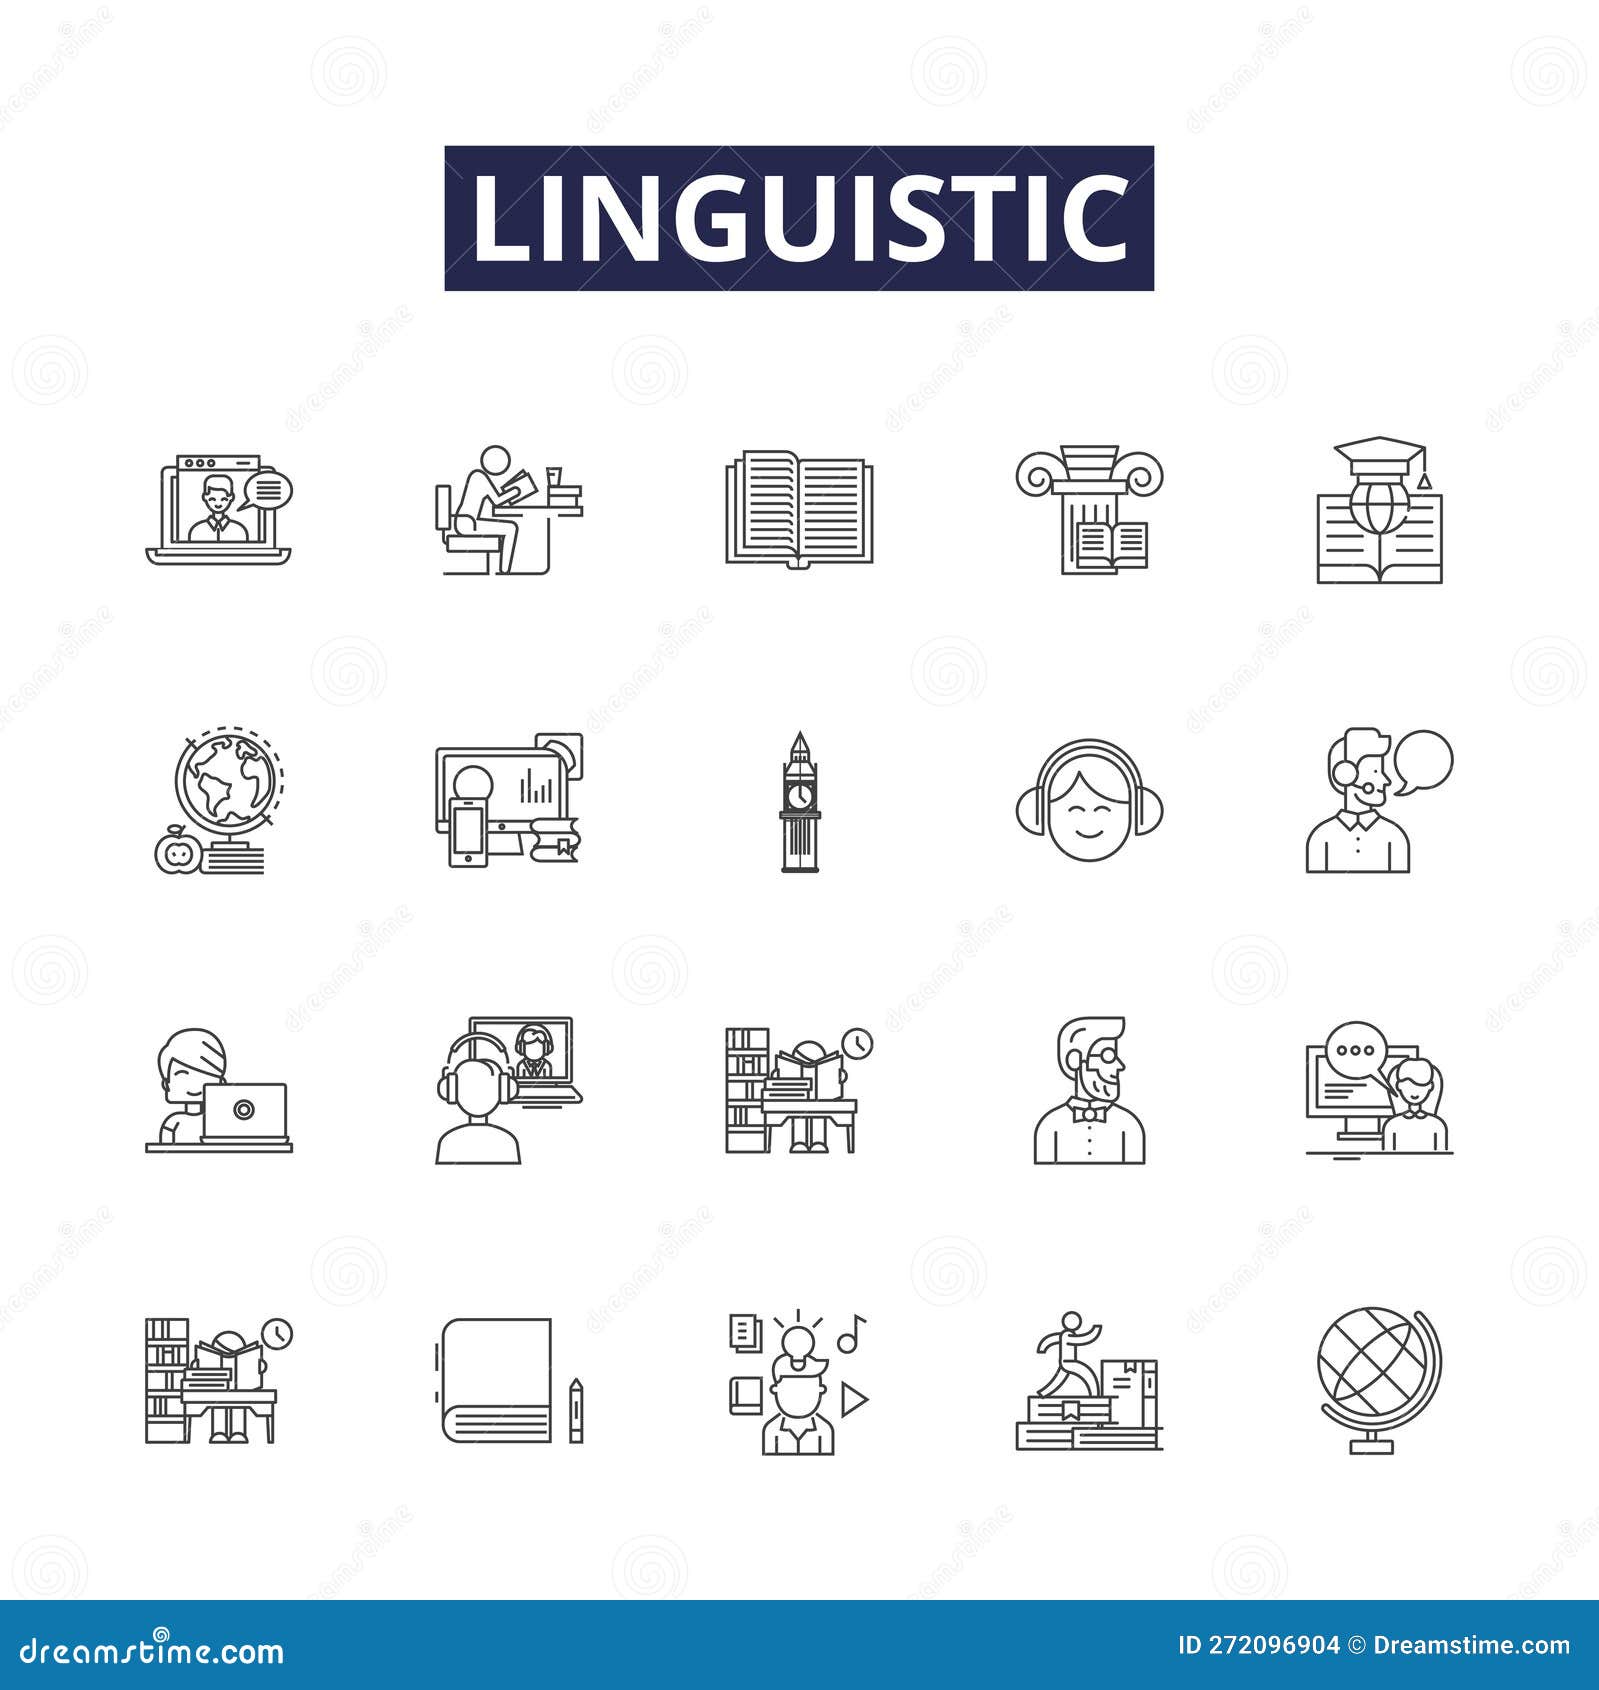 linguistic line  icons and signs. grammar, semantics, syntax, morphology, phonetics, phonology, dialects